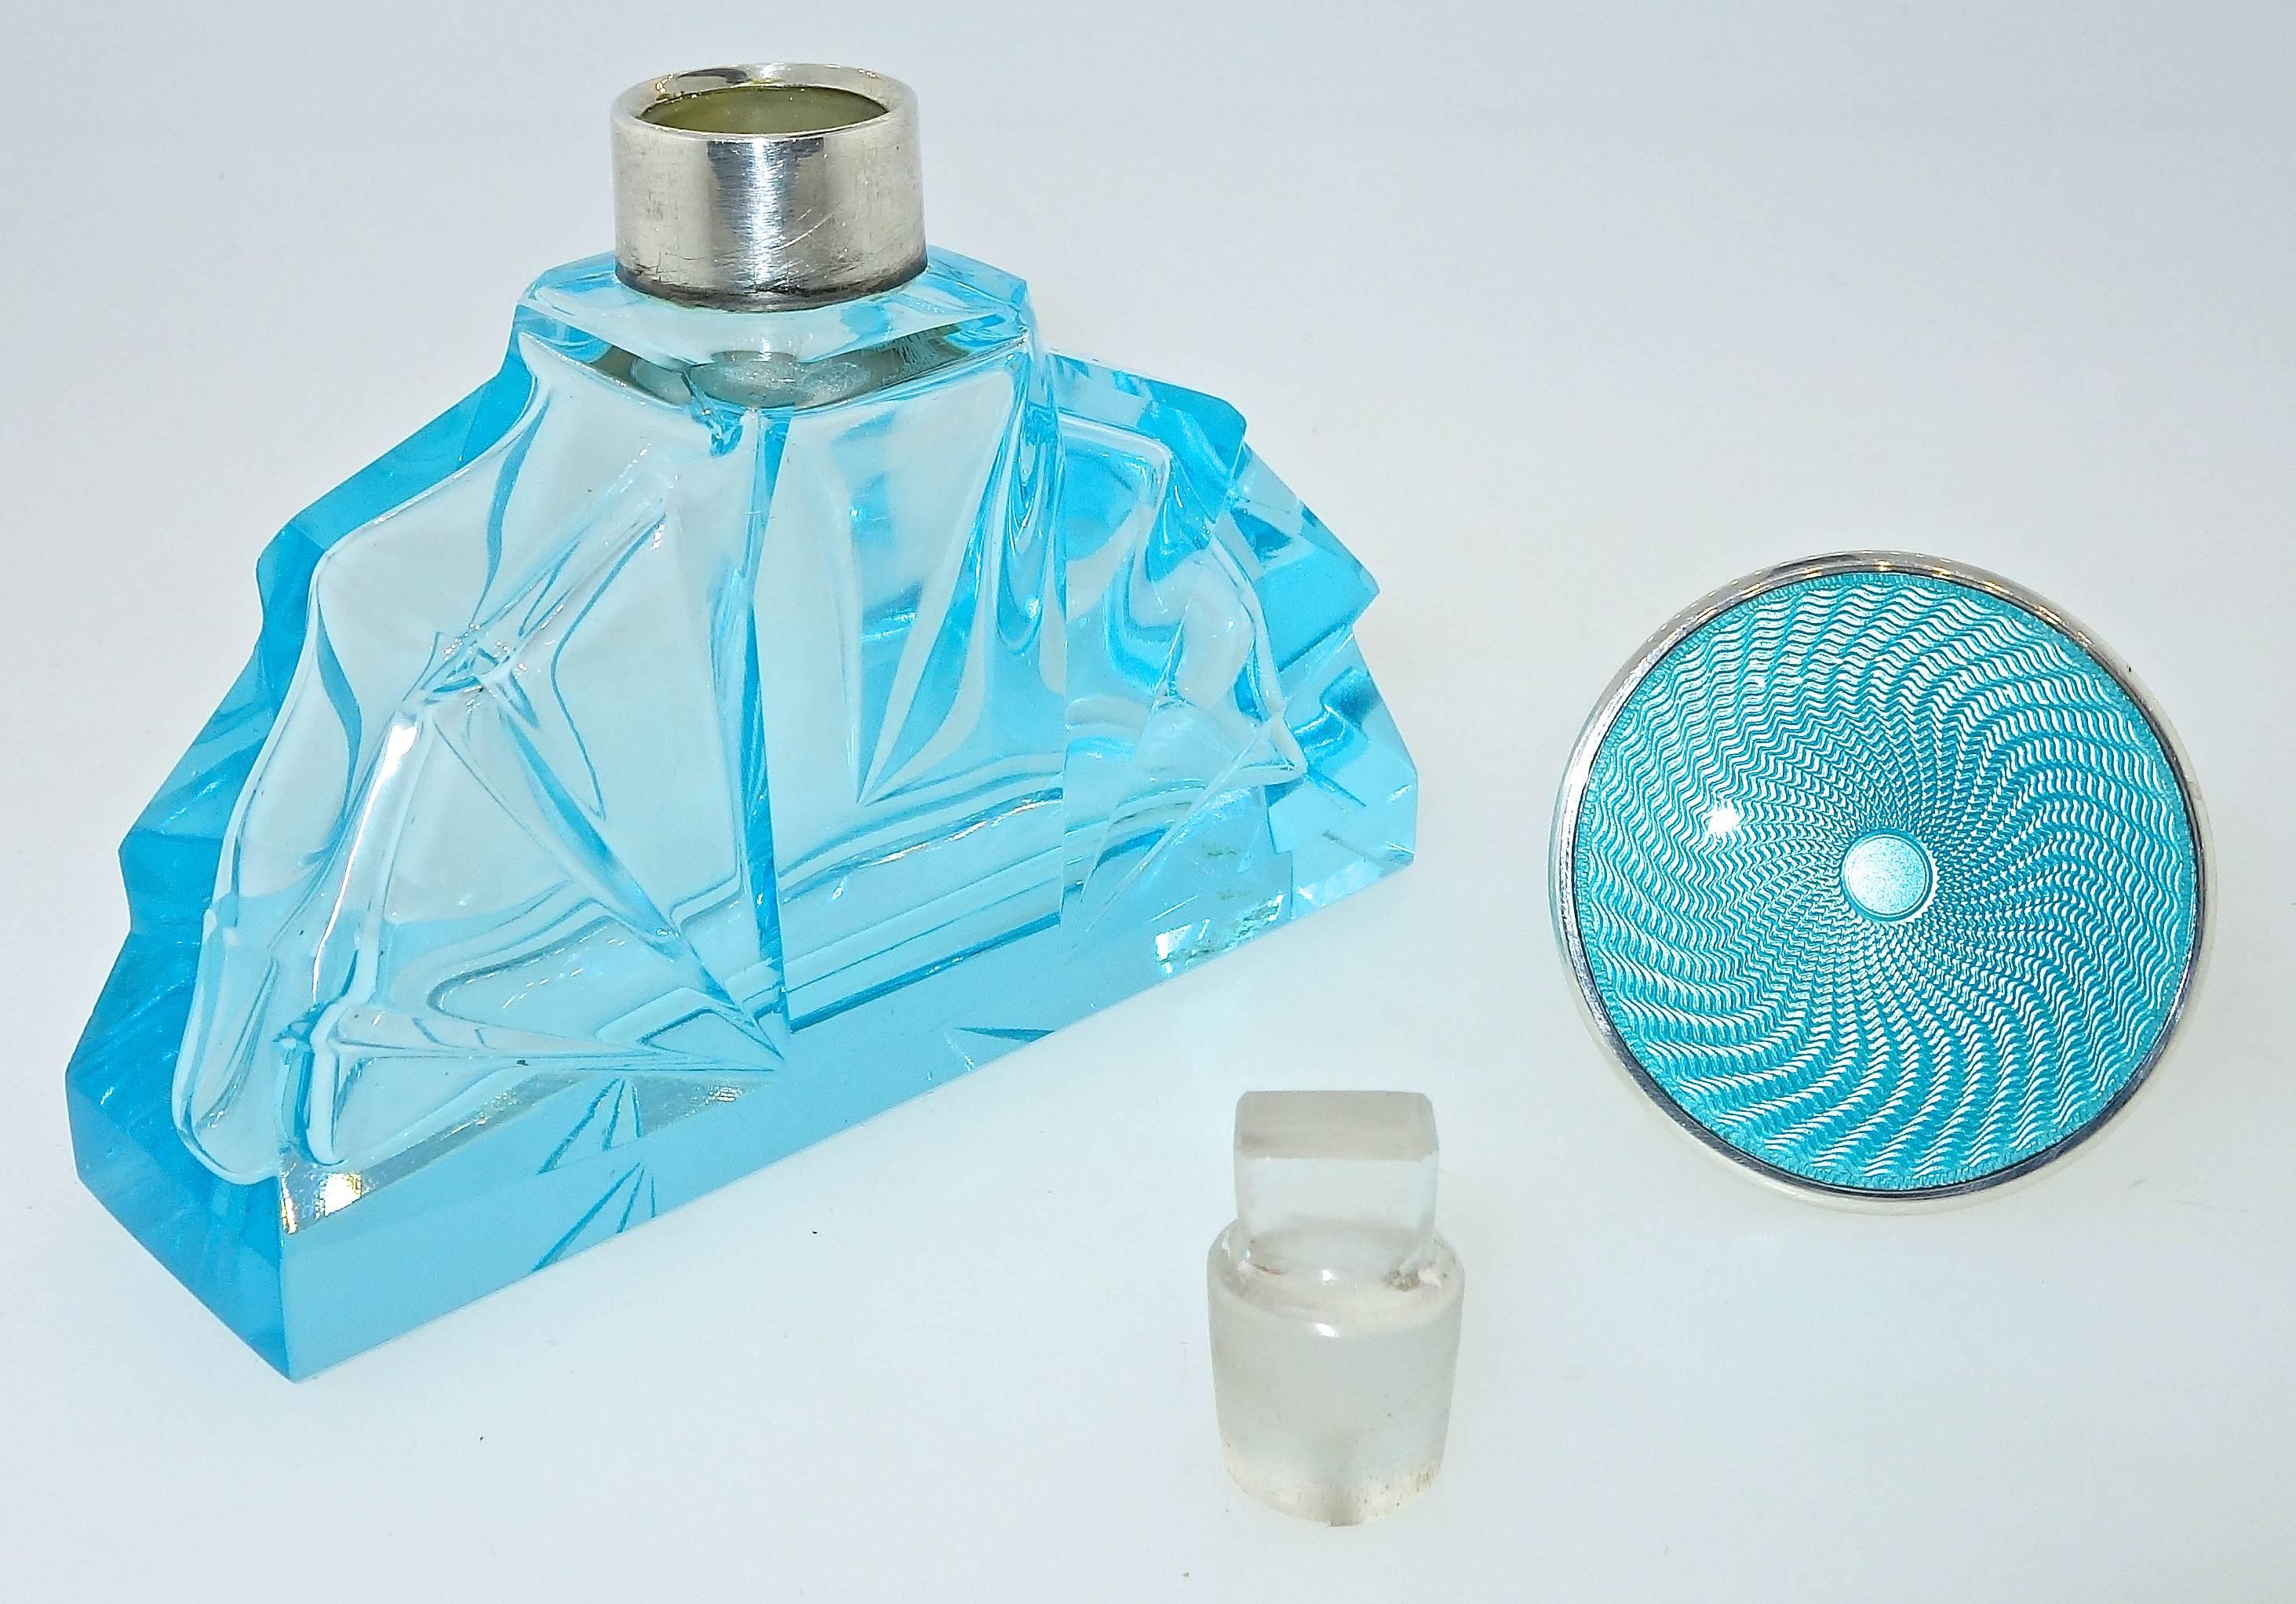 The top or lid is sterling silver with fine aqua blue guilloche enamel.  The cut glass bottle matches in color the top lid. This perfume bottle has the original 